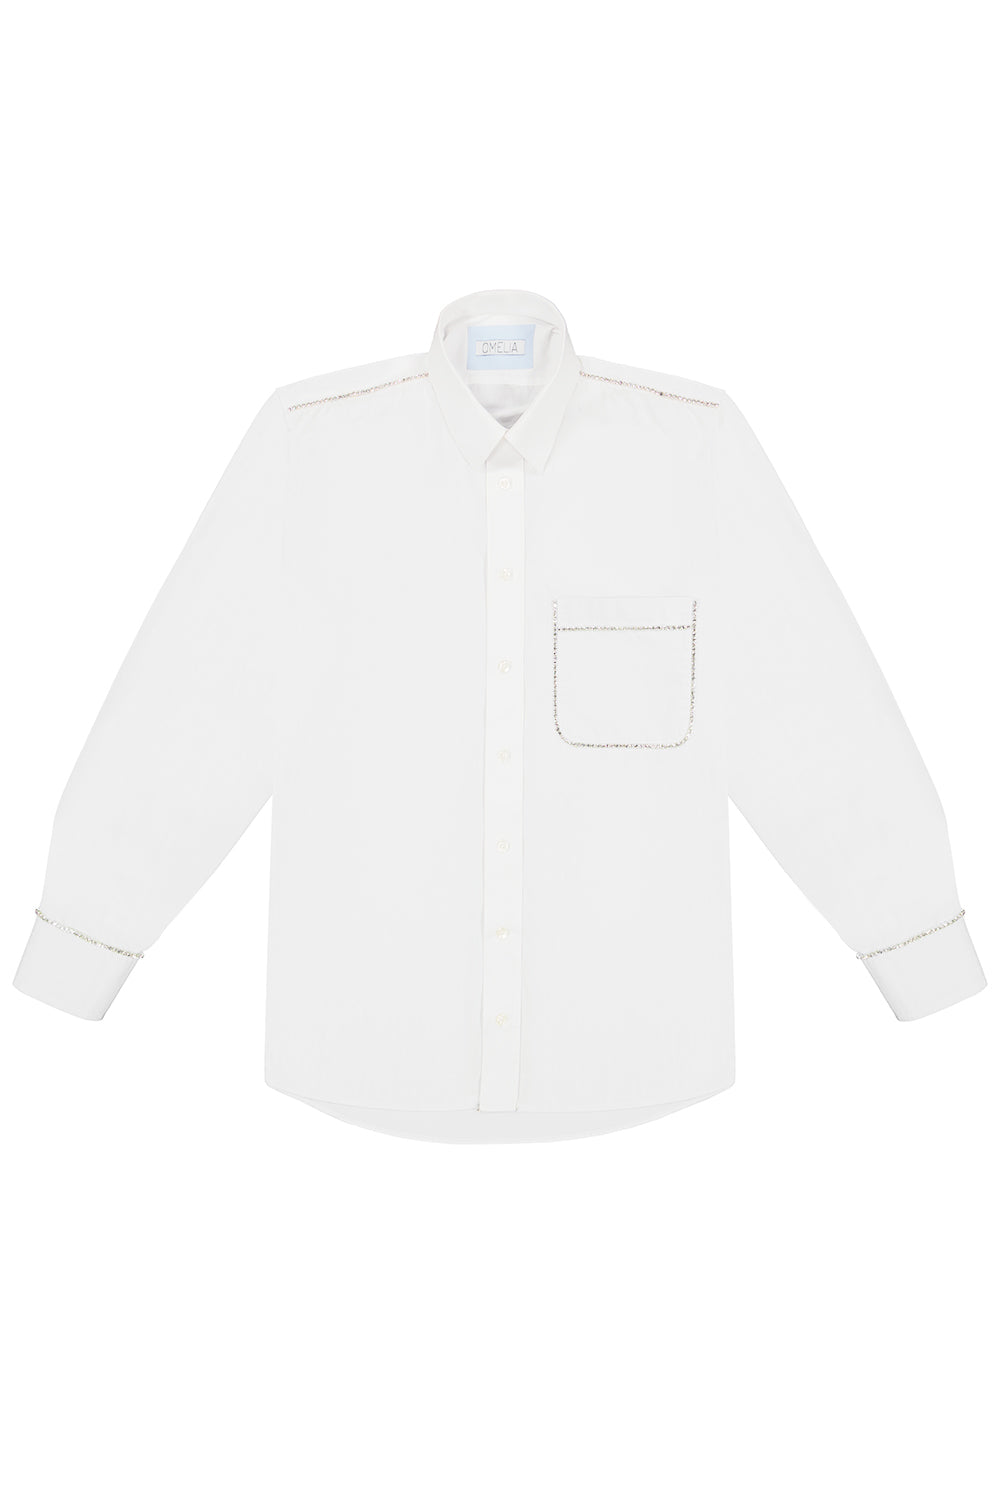 REDESIGNED SHIRT 19 BL – OMELIA ATELIER